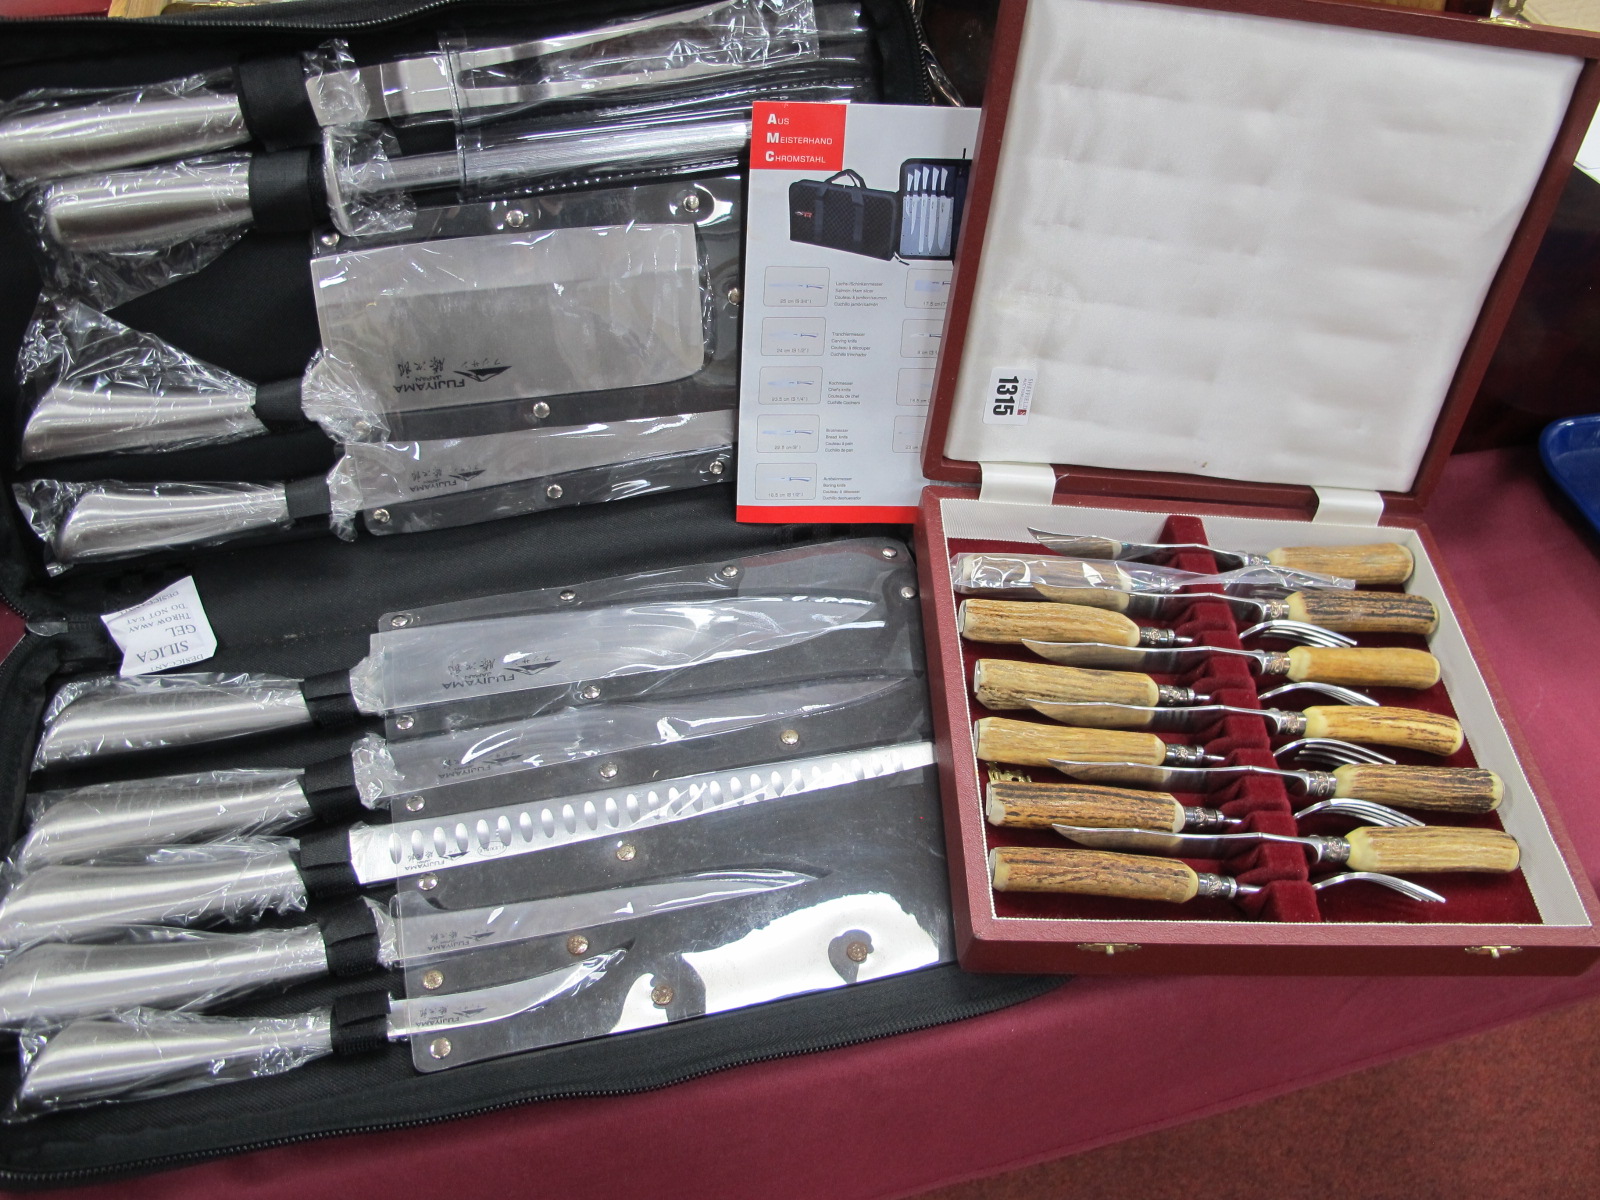 Stag Handled Steak Knives and Forks, six of each, in case. Fujiyama Chefs knife set.